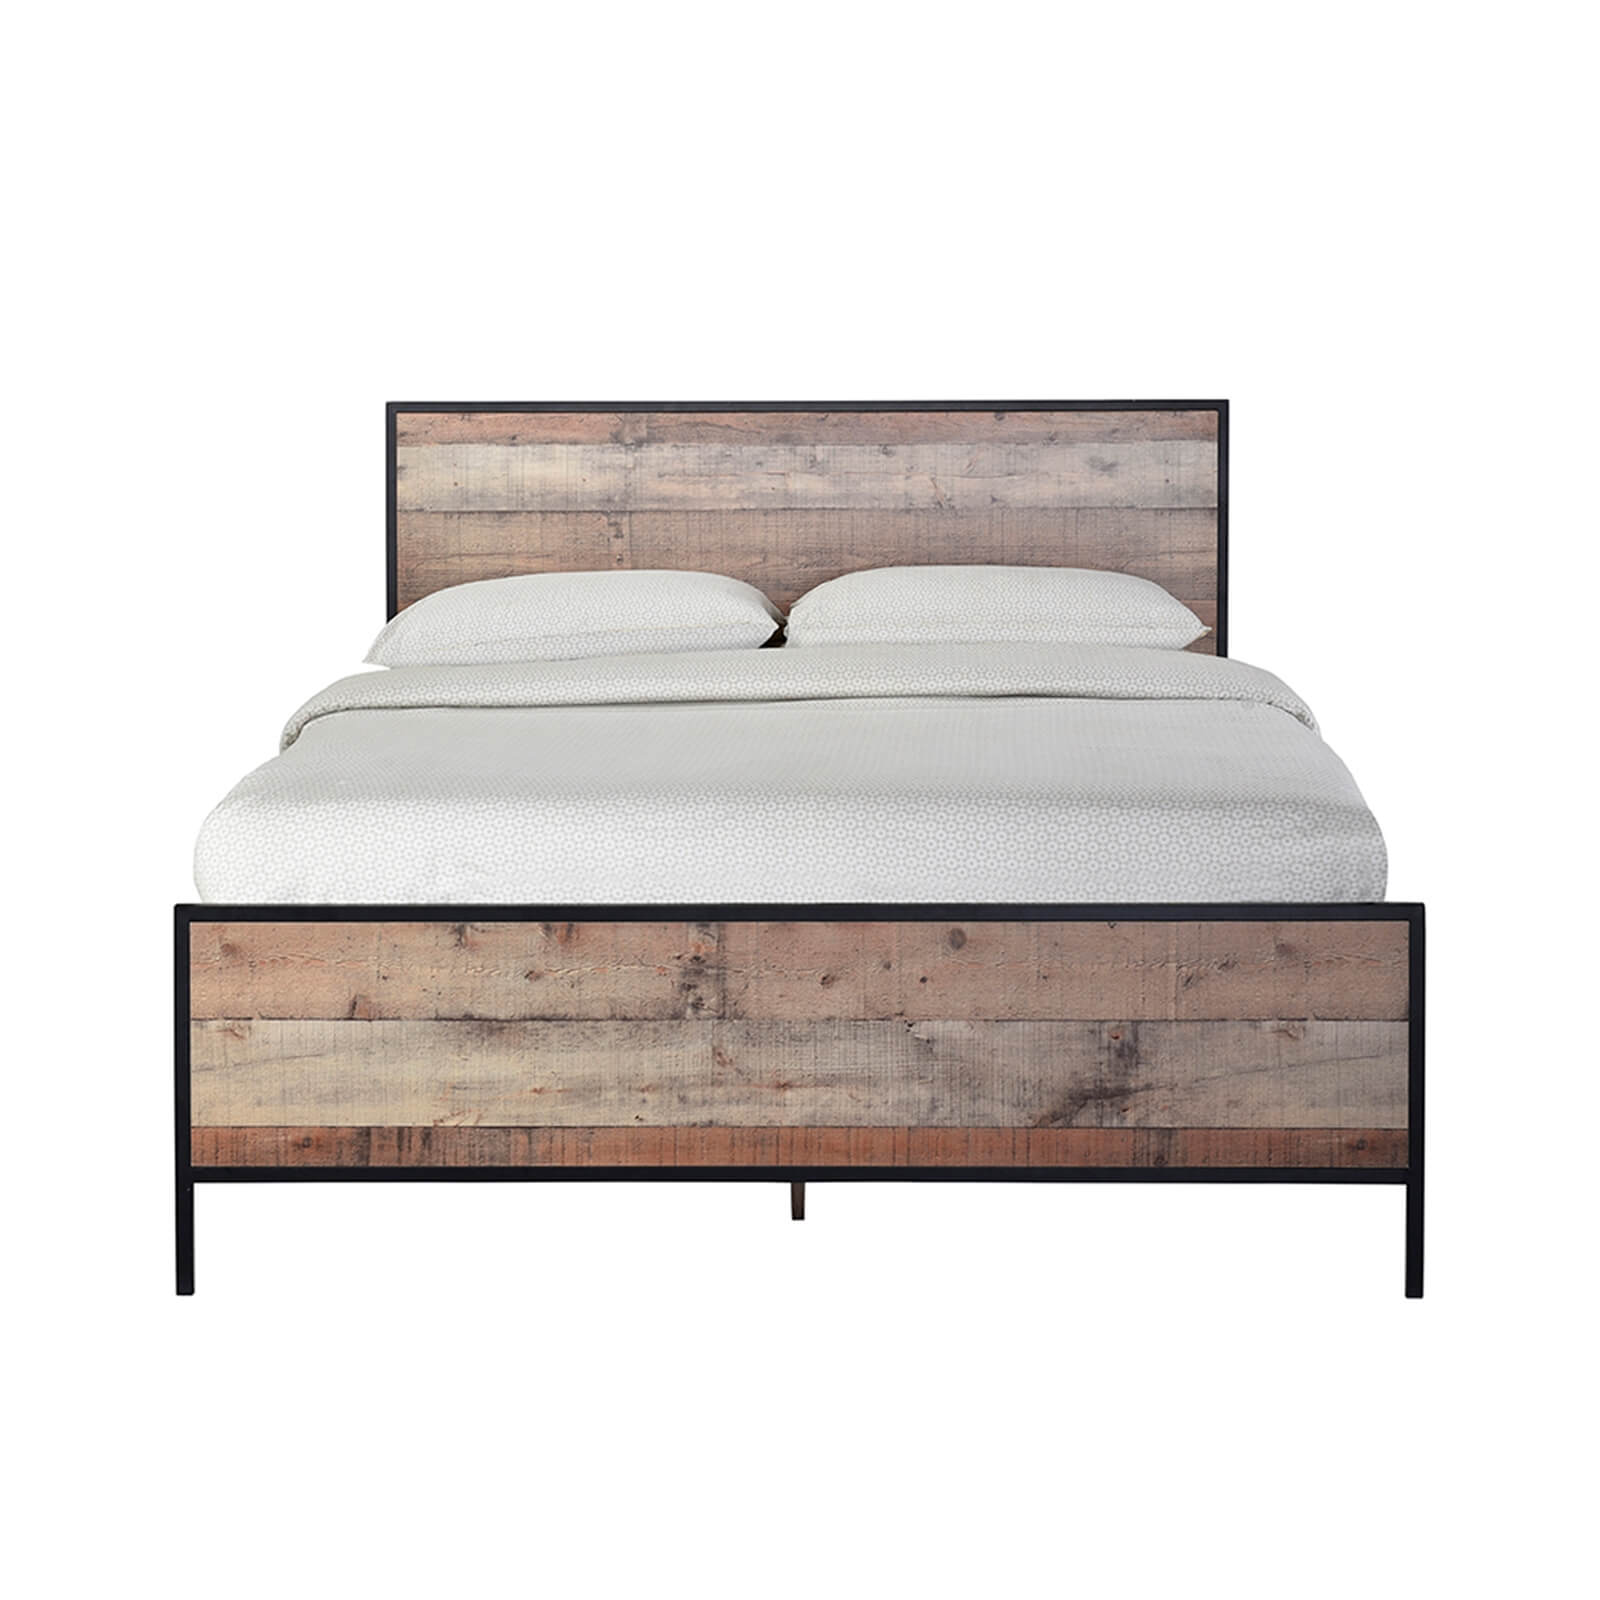 Hoxton Double Bed